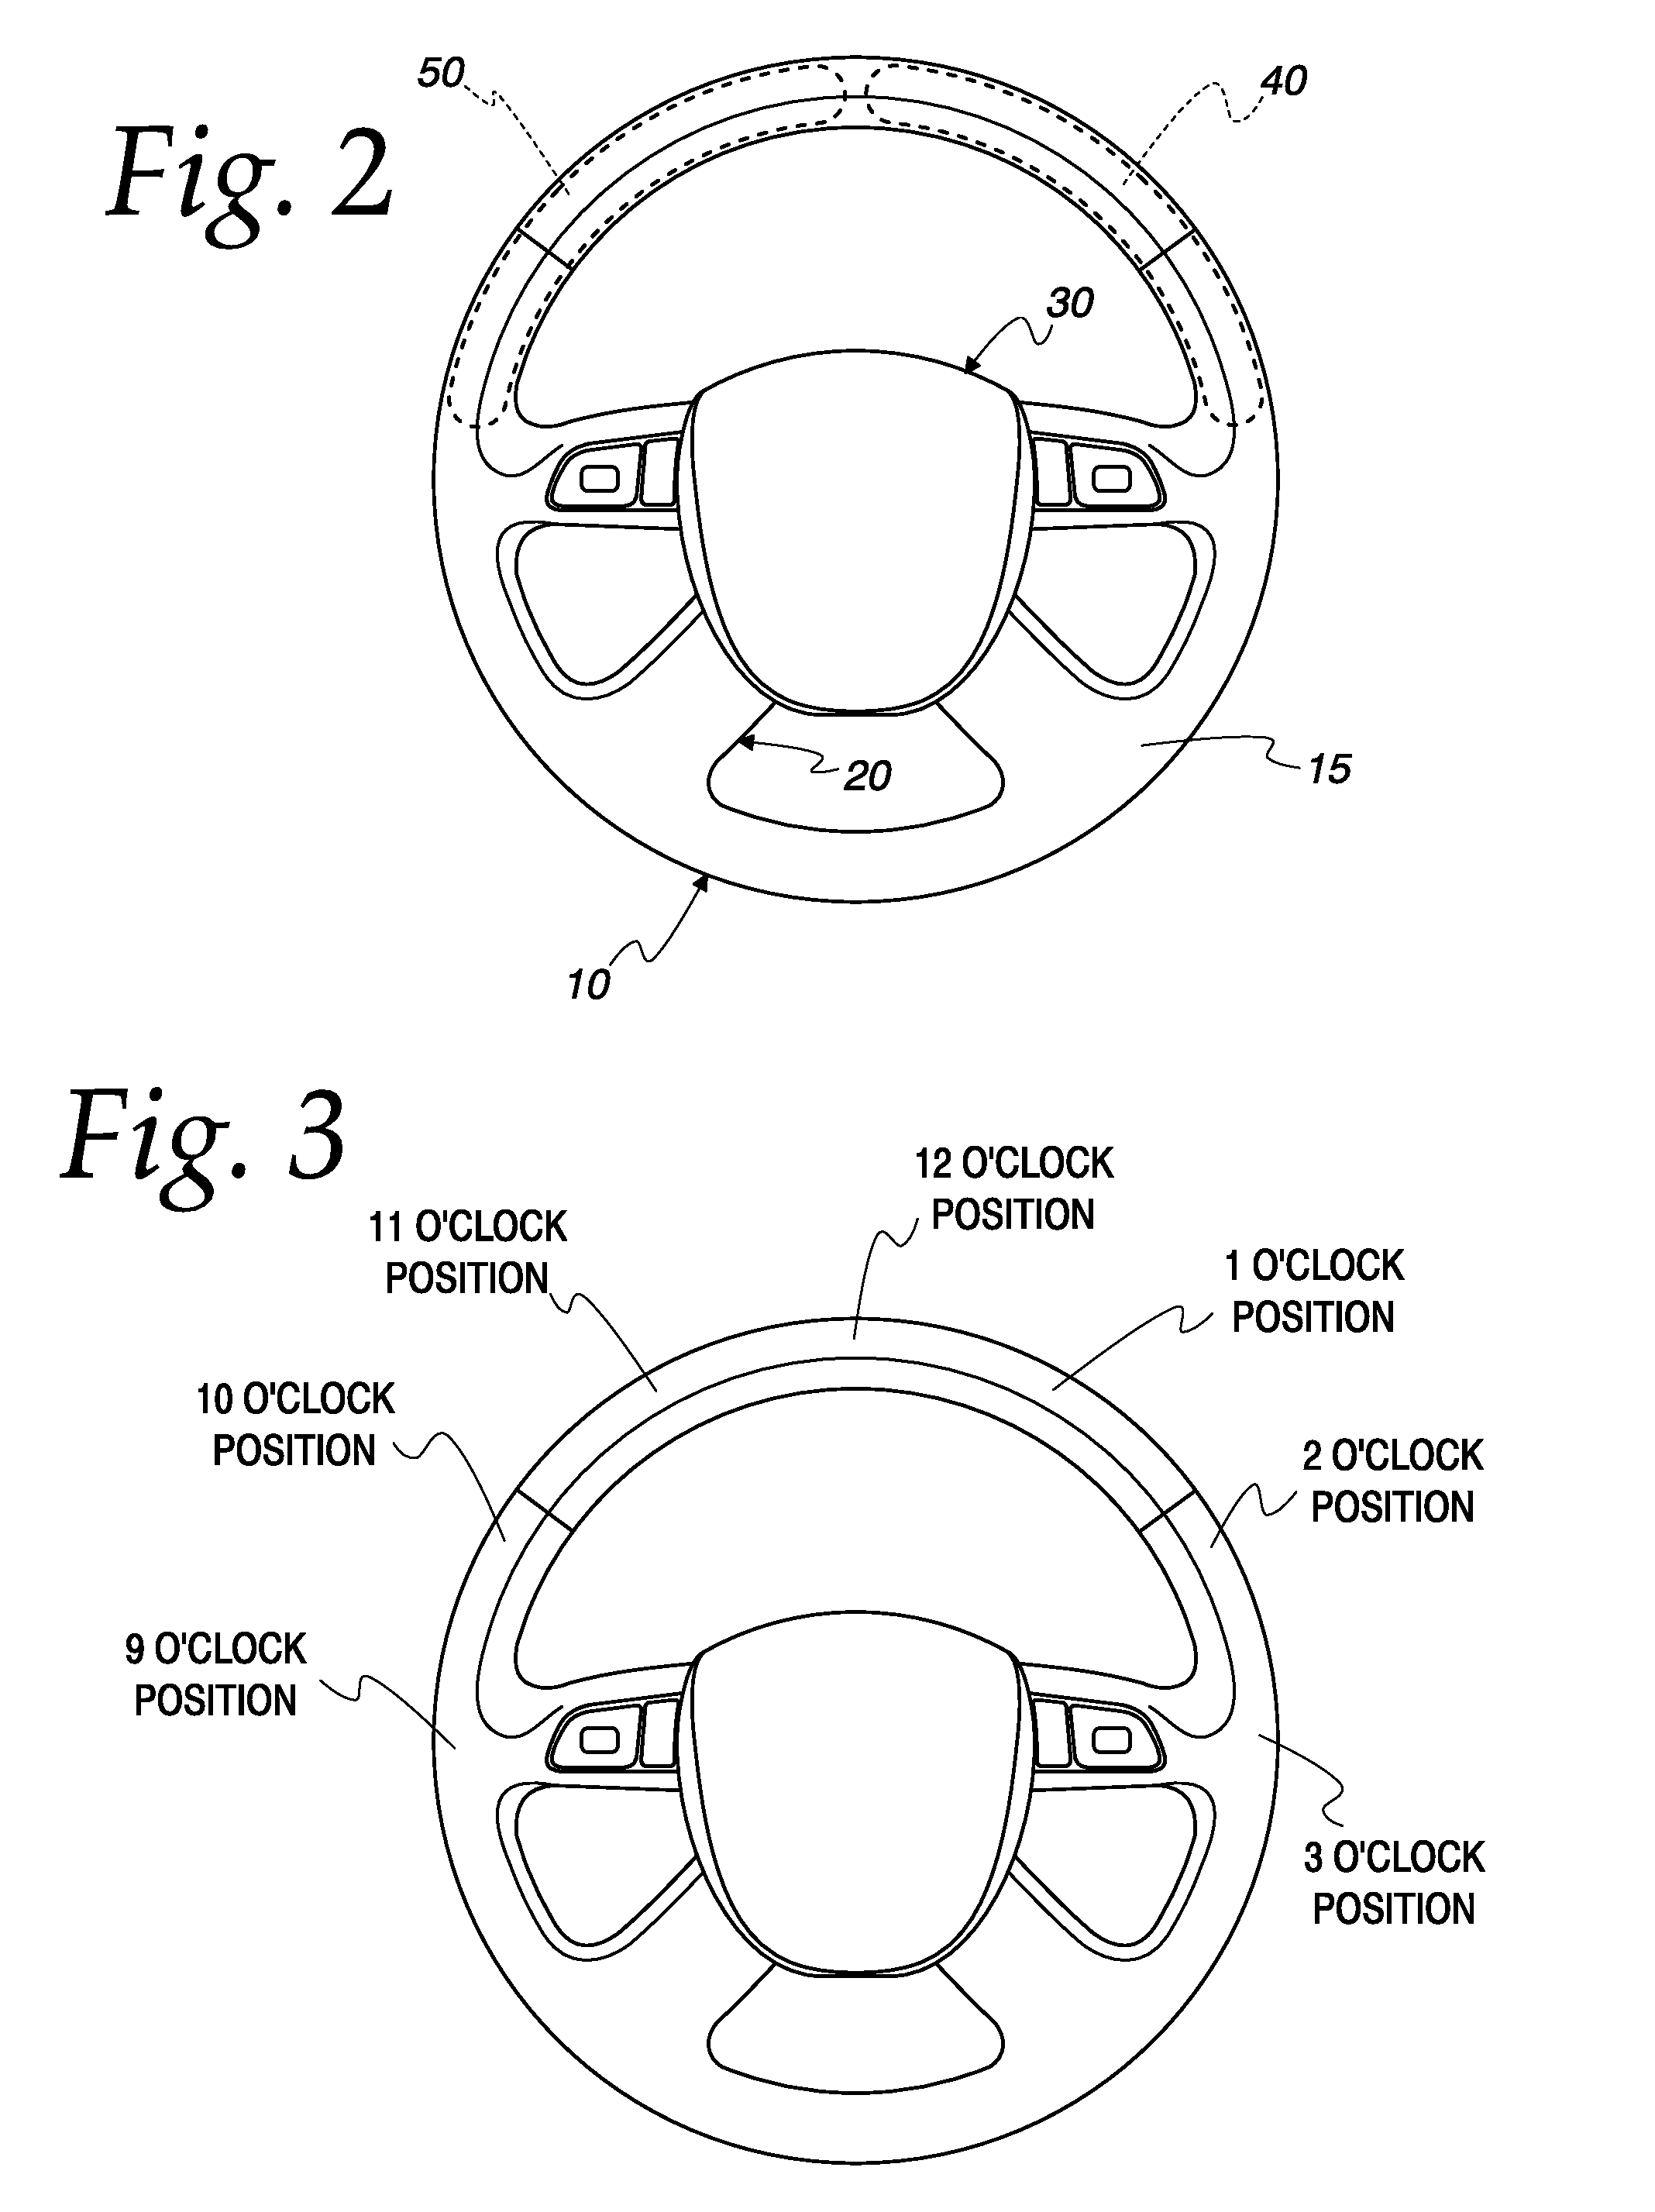 Integrated vehicle control system and apparatus